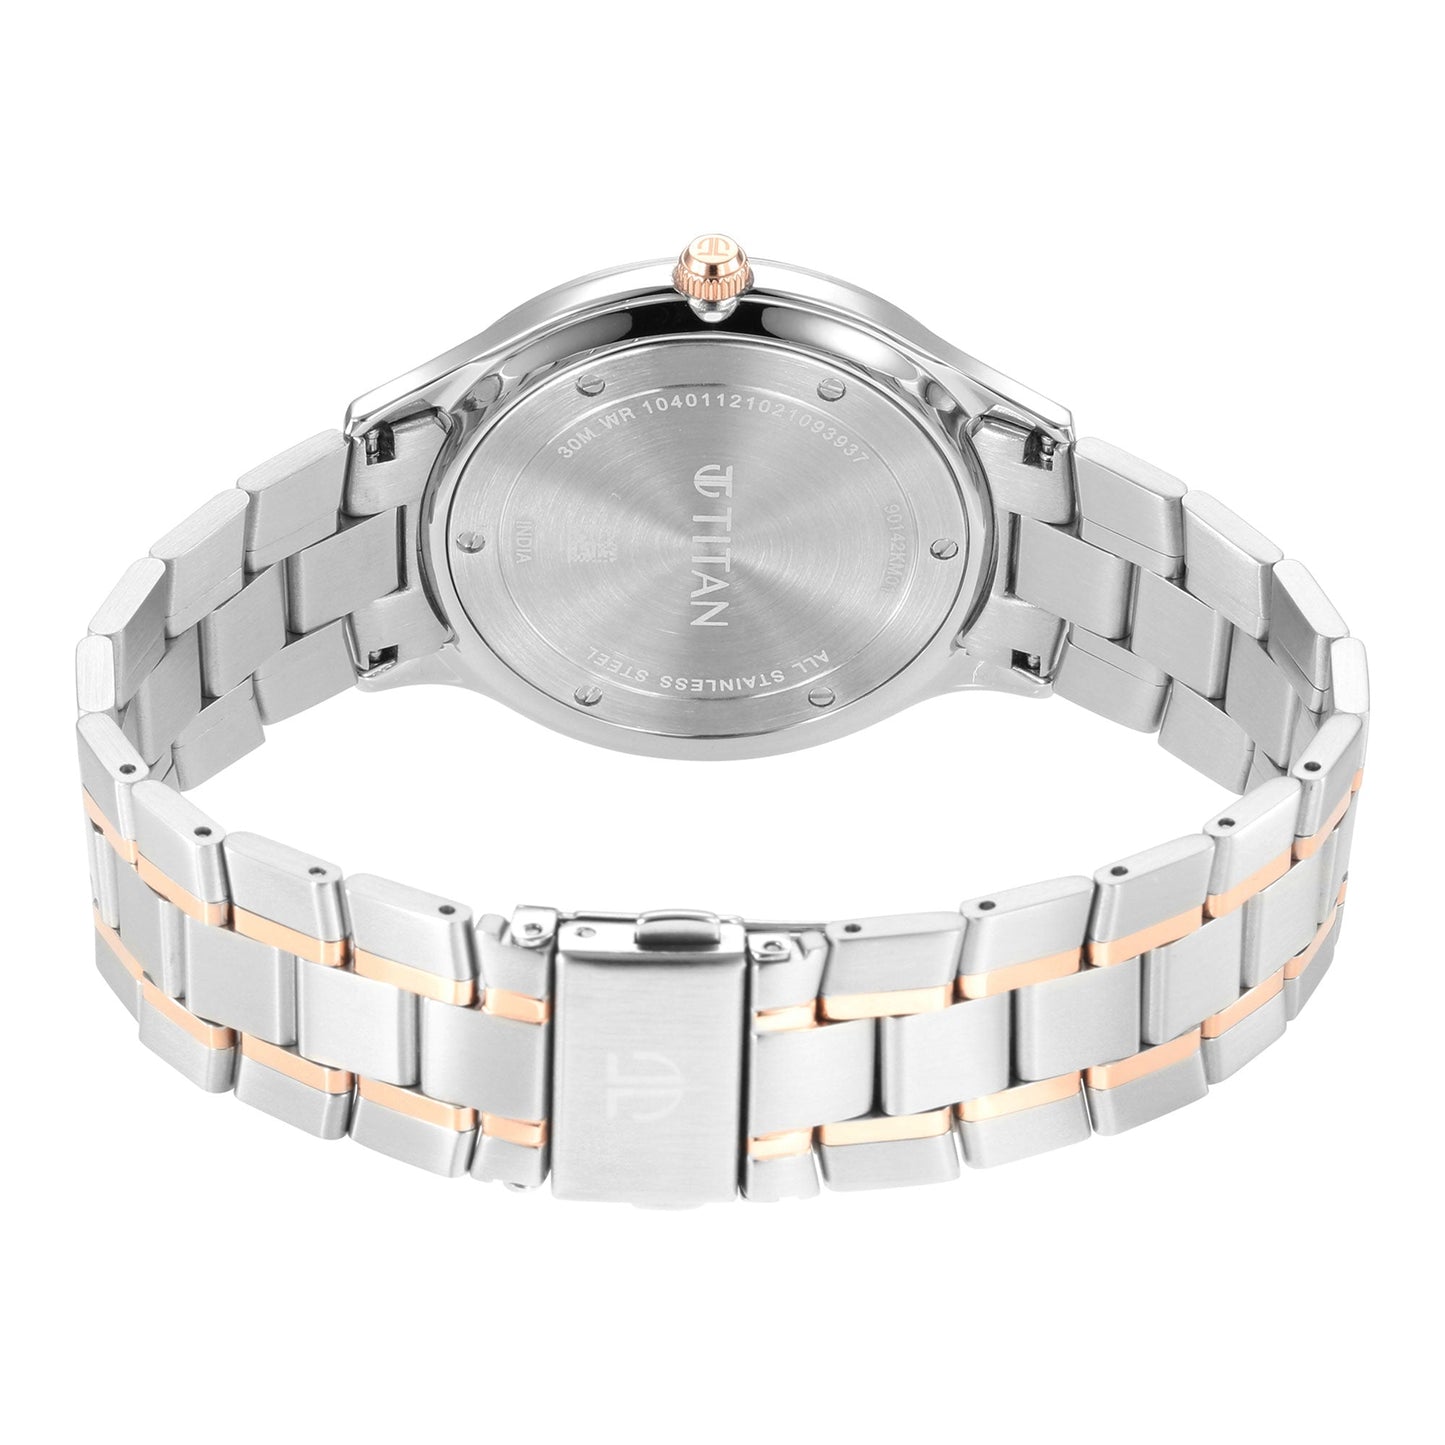 Titan Classique Slimline Silver Dial Analog with Date Stainless Steel Strap watch for Men